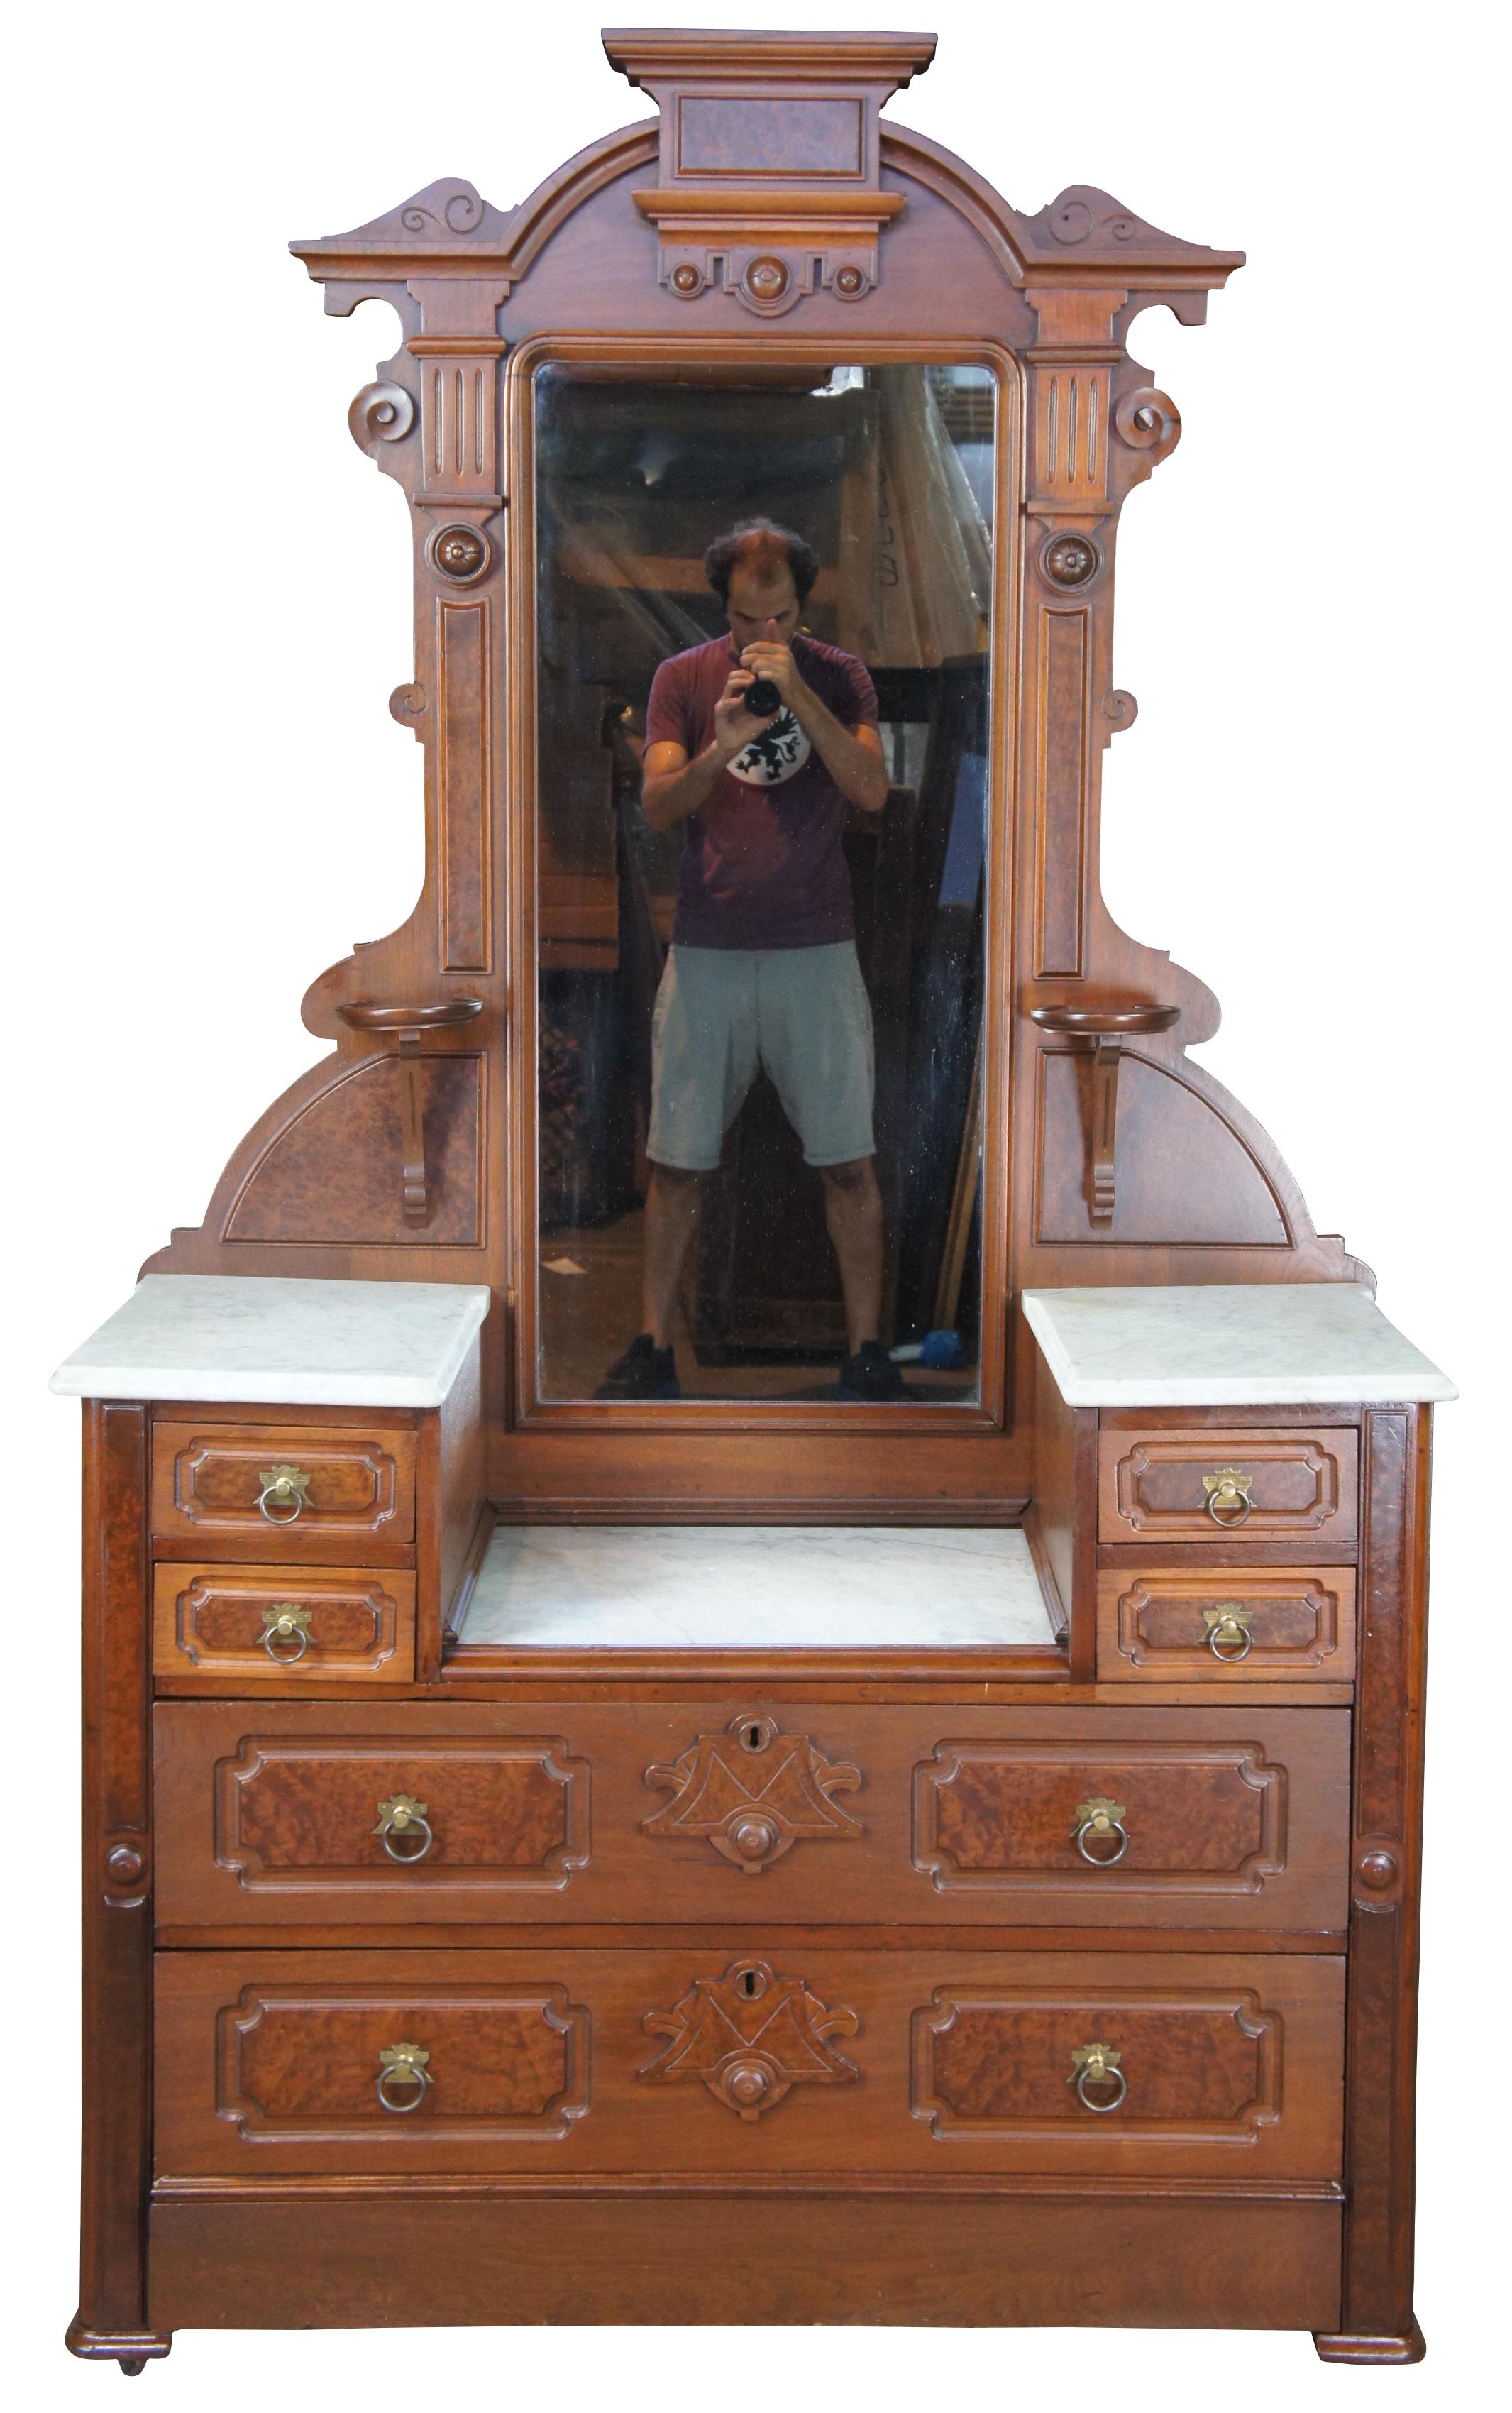 Antique Victorian Eastlake gentleman's dresser or vanity. Made of walnut featuring carved burl panels and ornate fluted and turned accents. The dresser has two candle or shaving stands, three marble tops, four small drawers and two larger, all